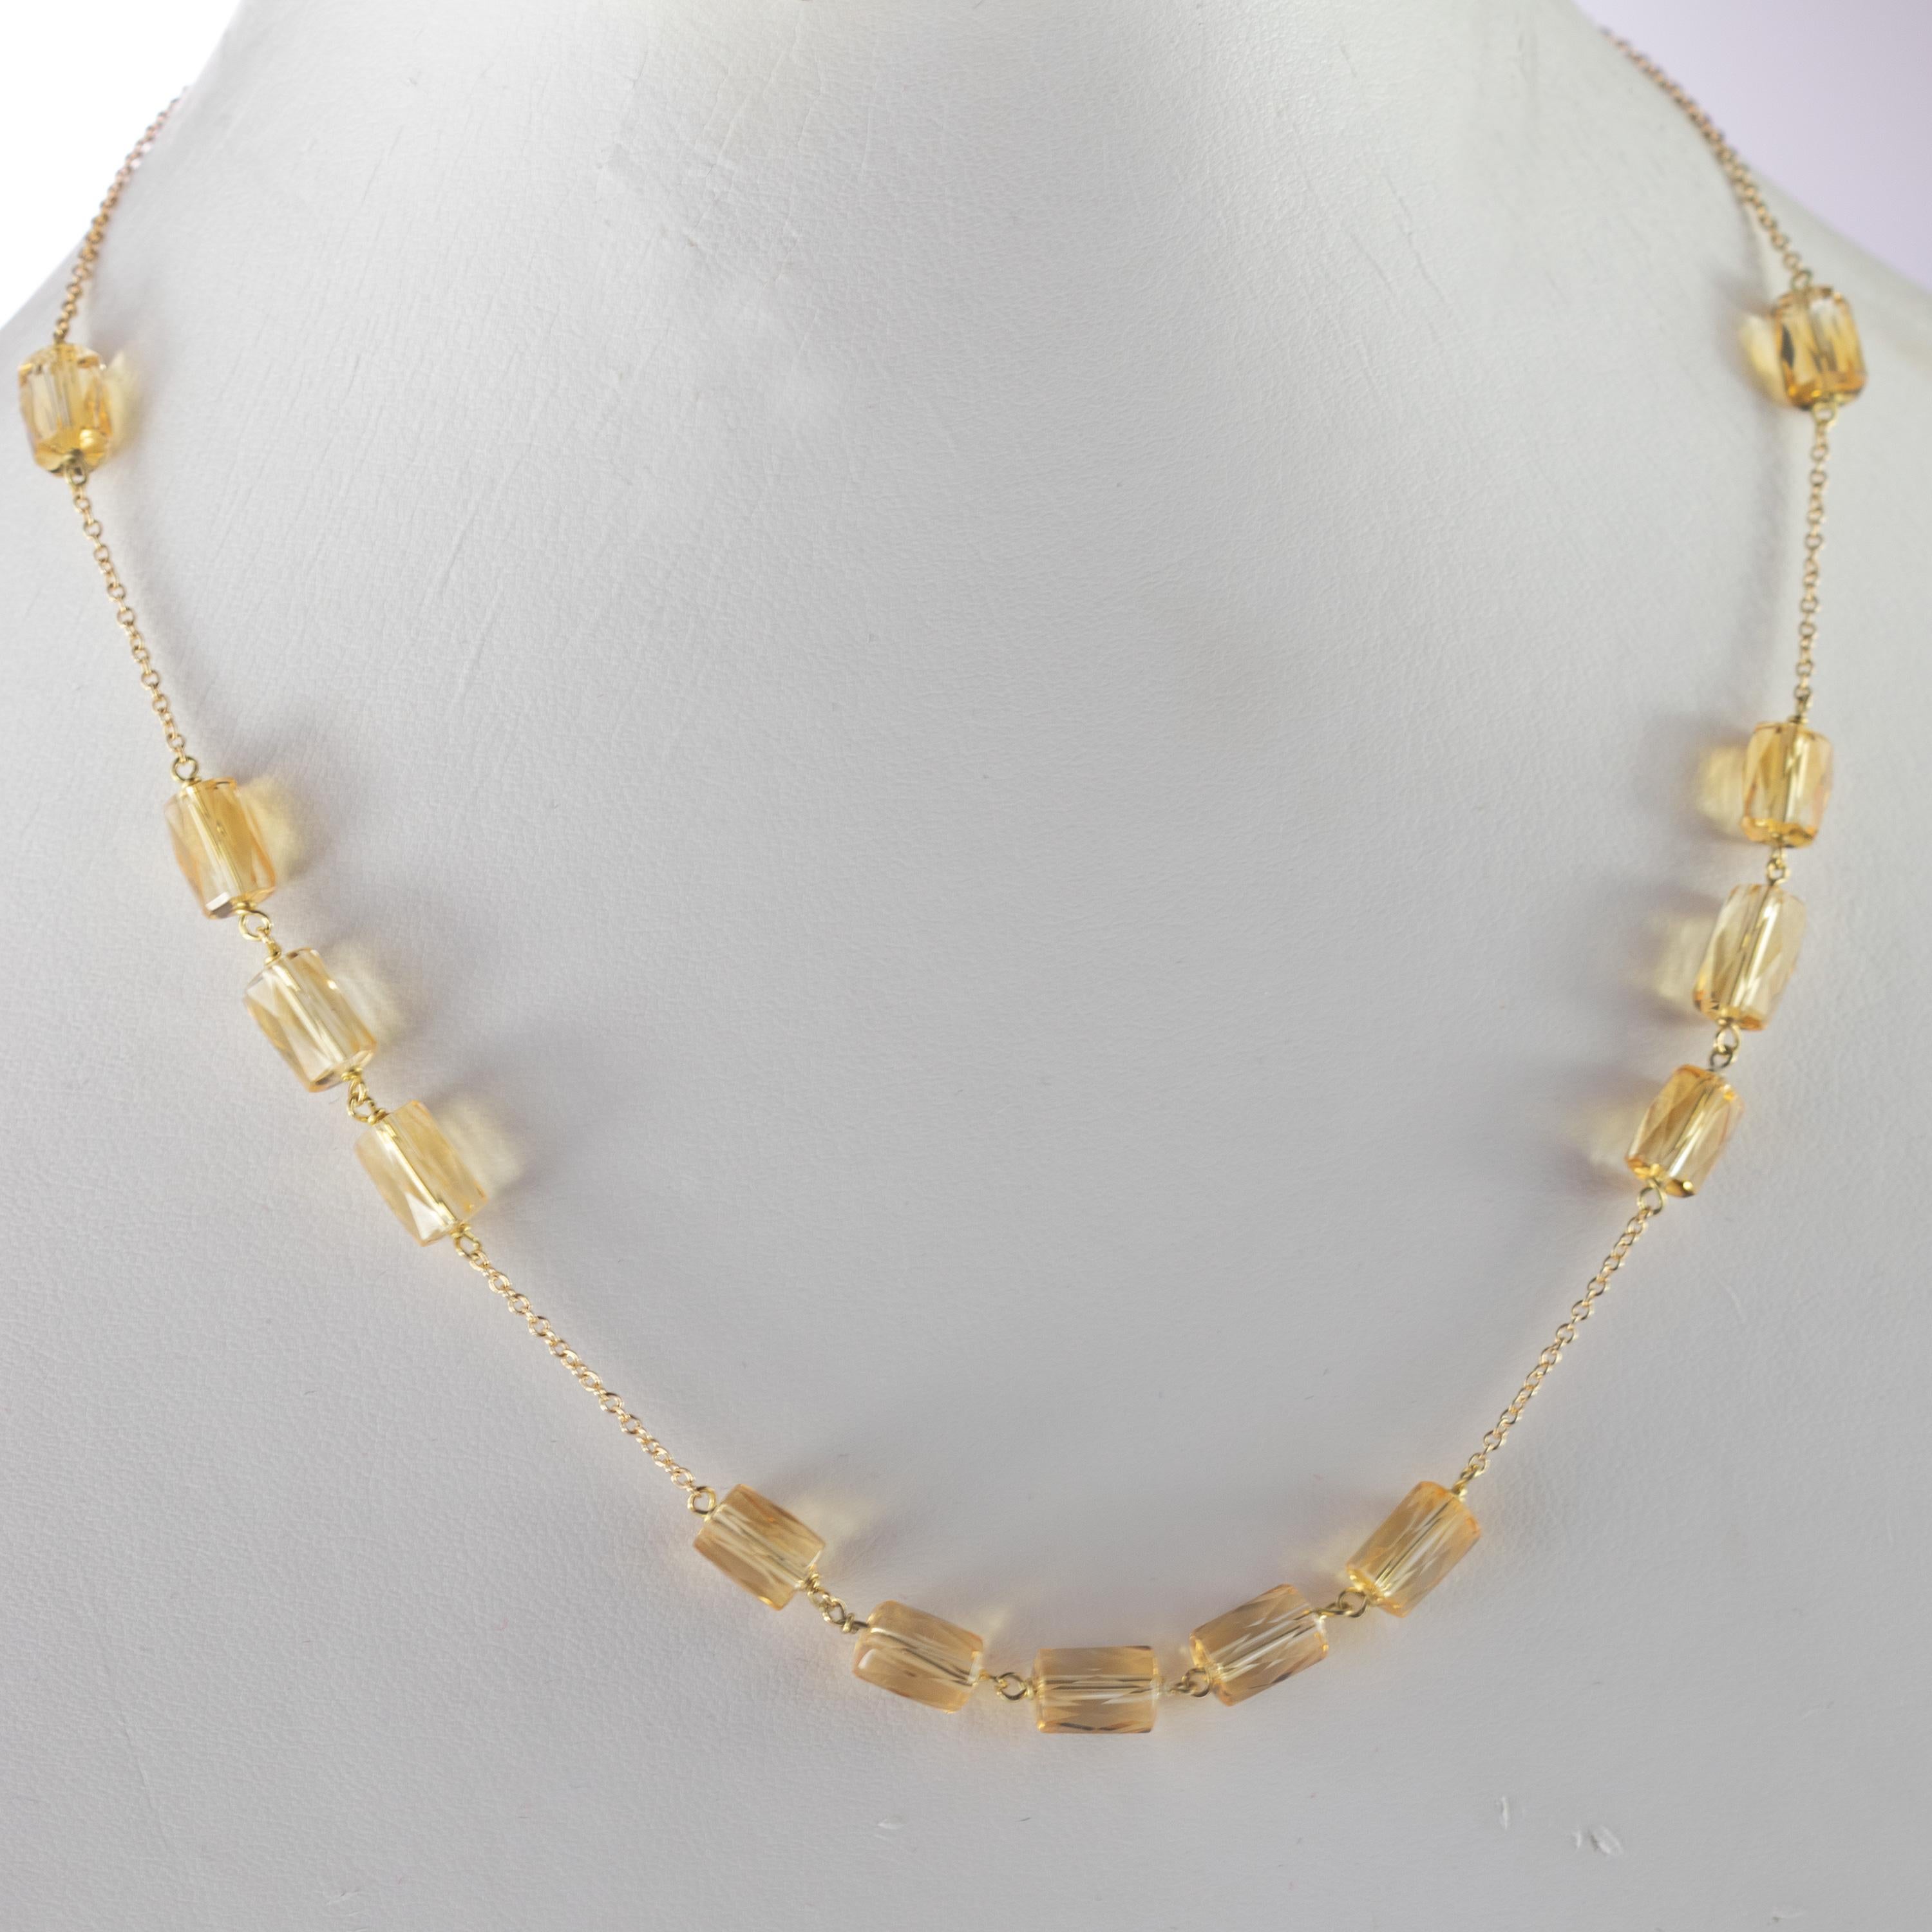 Intini Jewels Citrine Tubets Beads 9 Karat Yellow Gold Chain Handmade Necklace For Sale 2